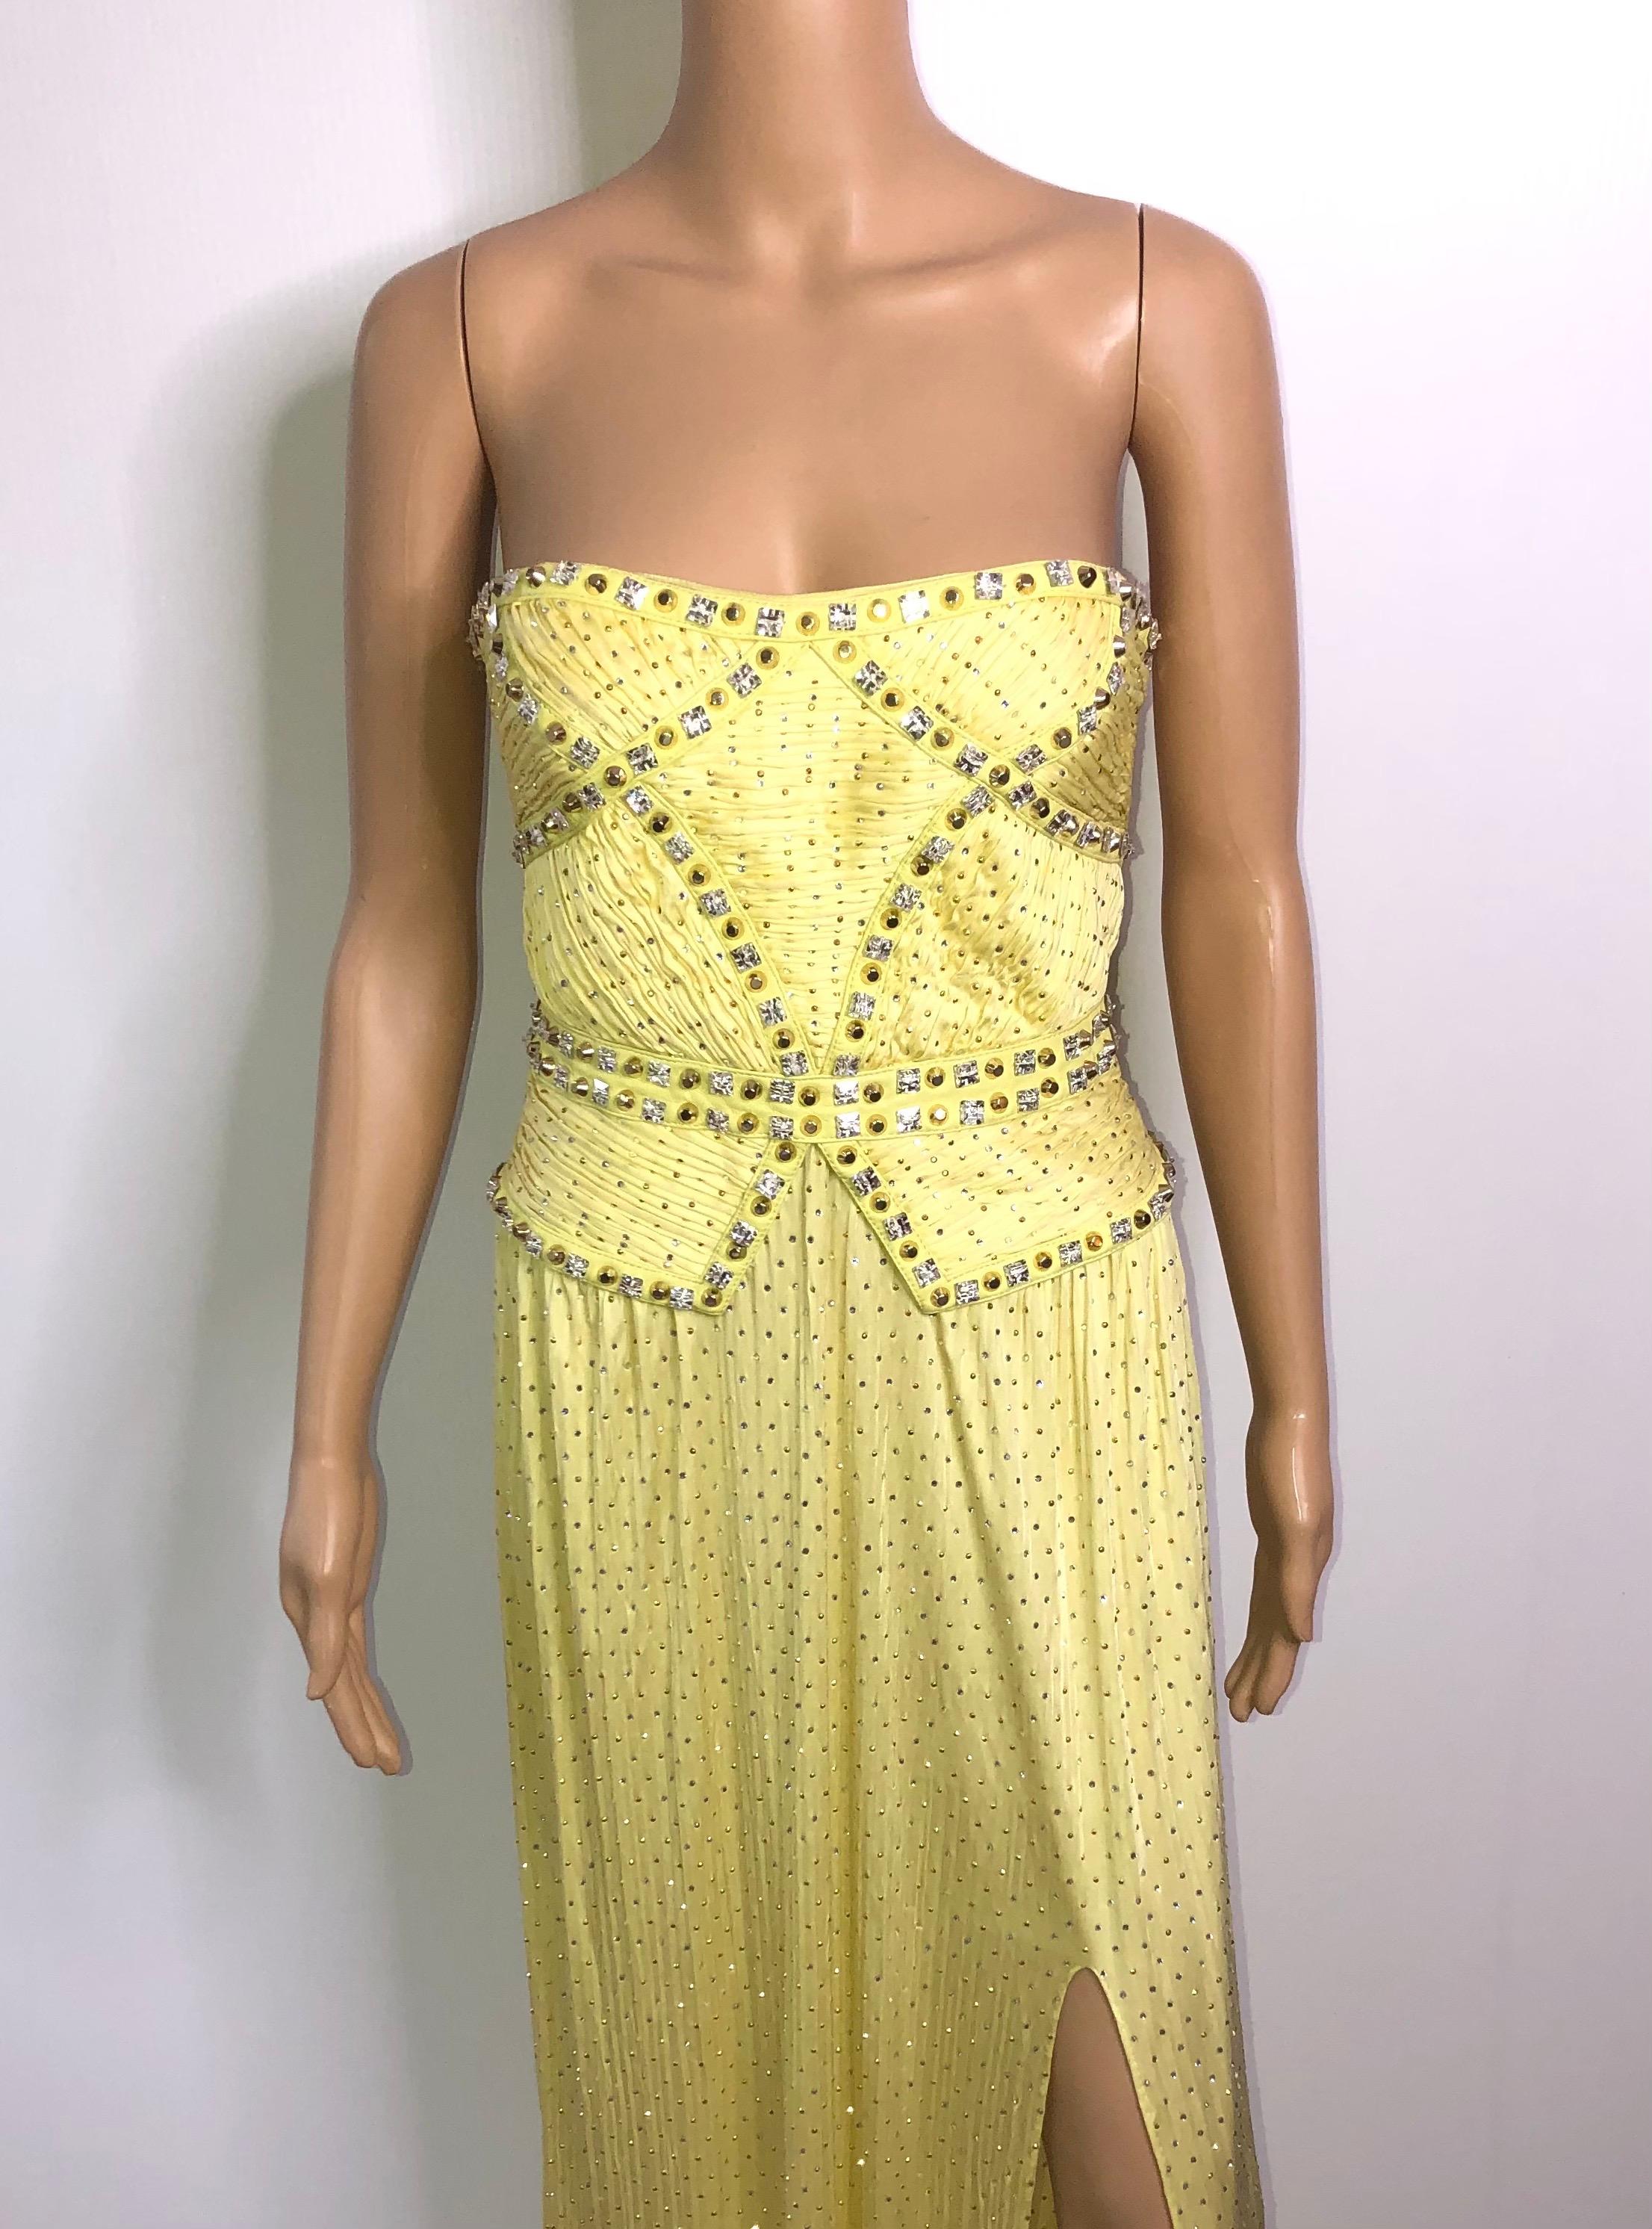 Versace S/S 2012 Runway Bustier Corset Crystal Embellished Evening Dress Gown  In Good Condition For Sale In Naples, FL